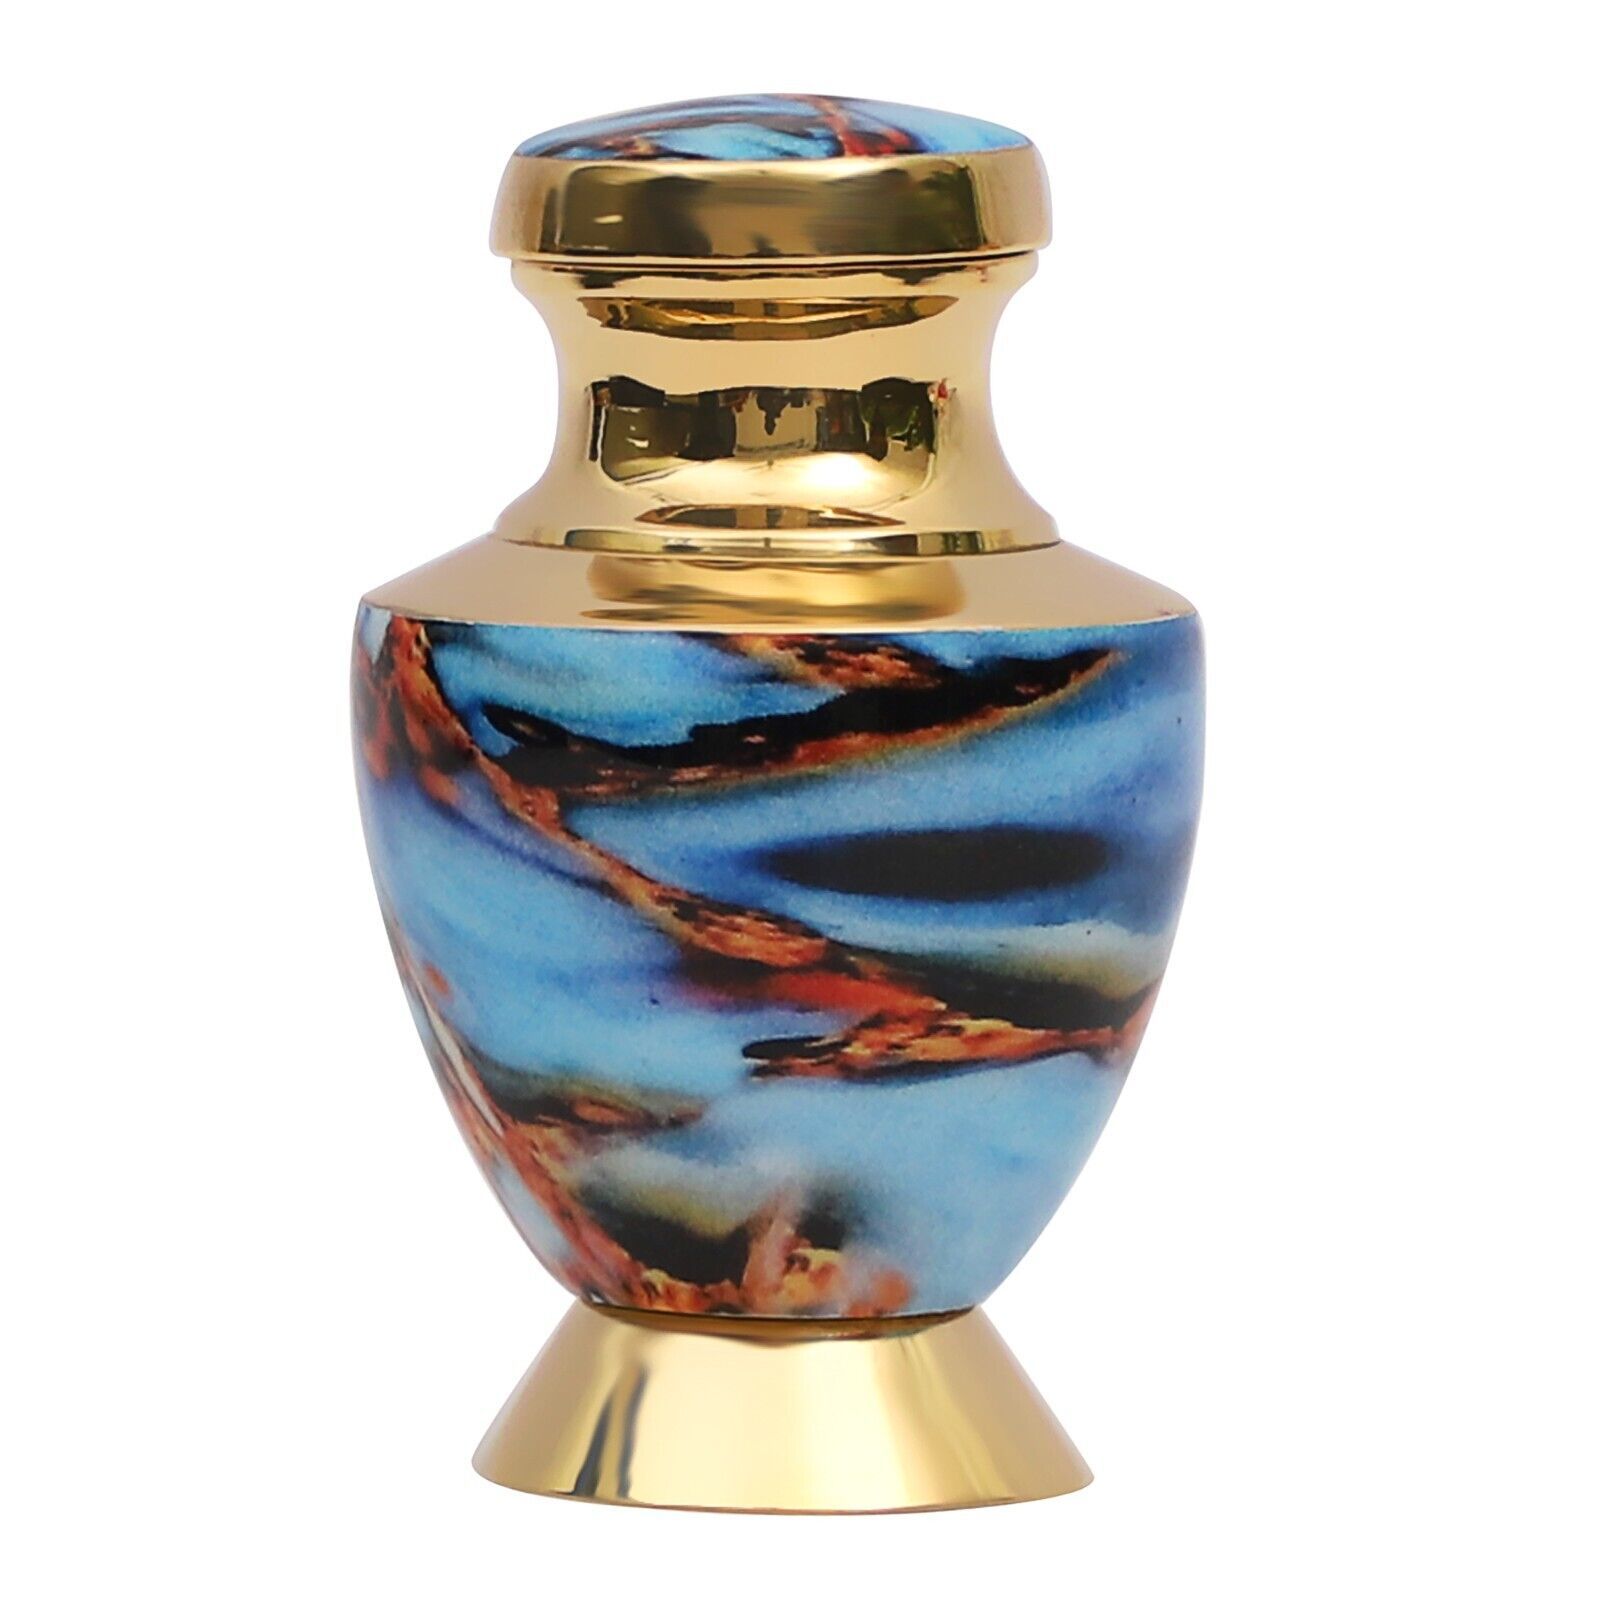 Beautiful Color Design Brass Small Keepsake Cremation Urns for Human Ashes -BLUE